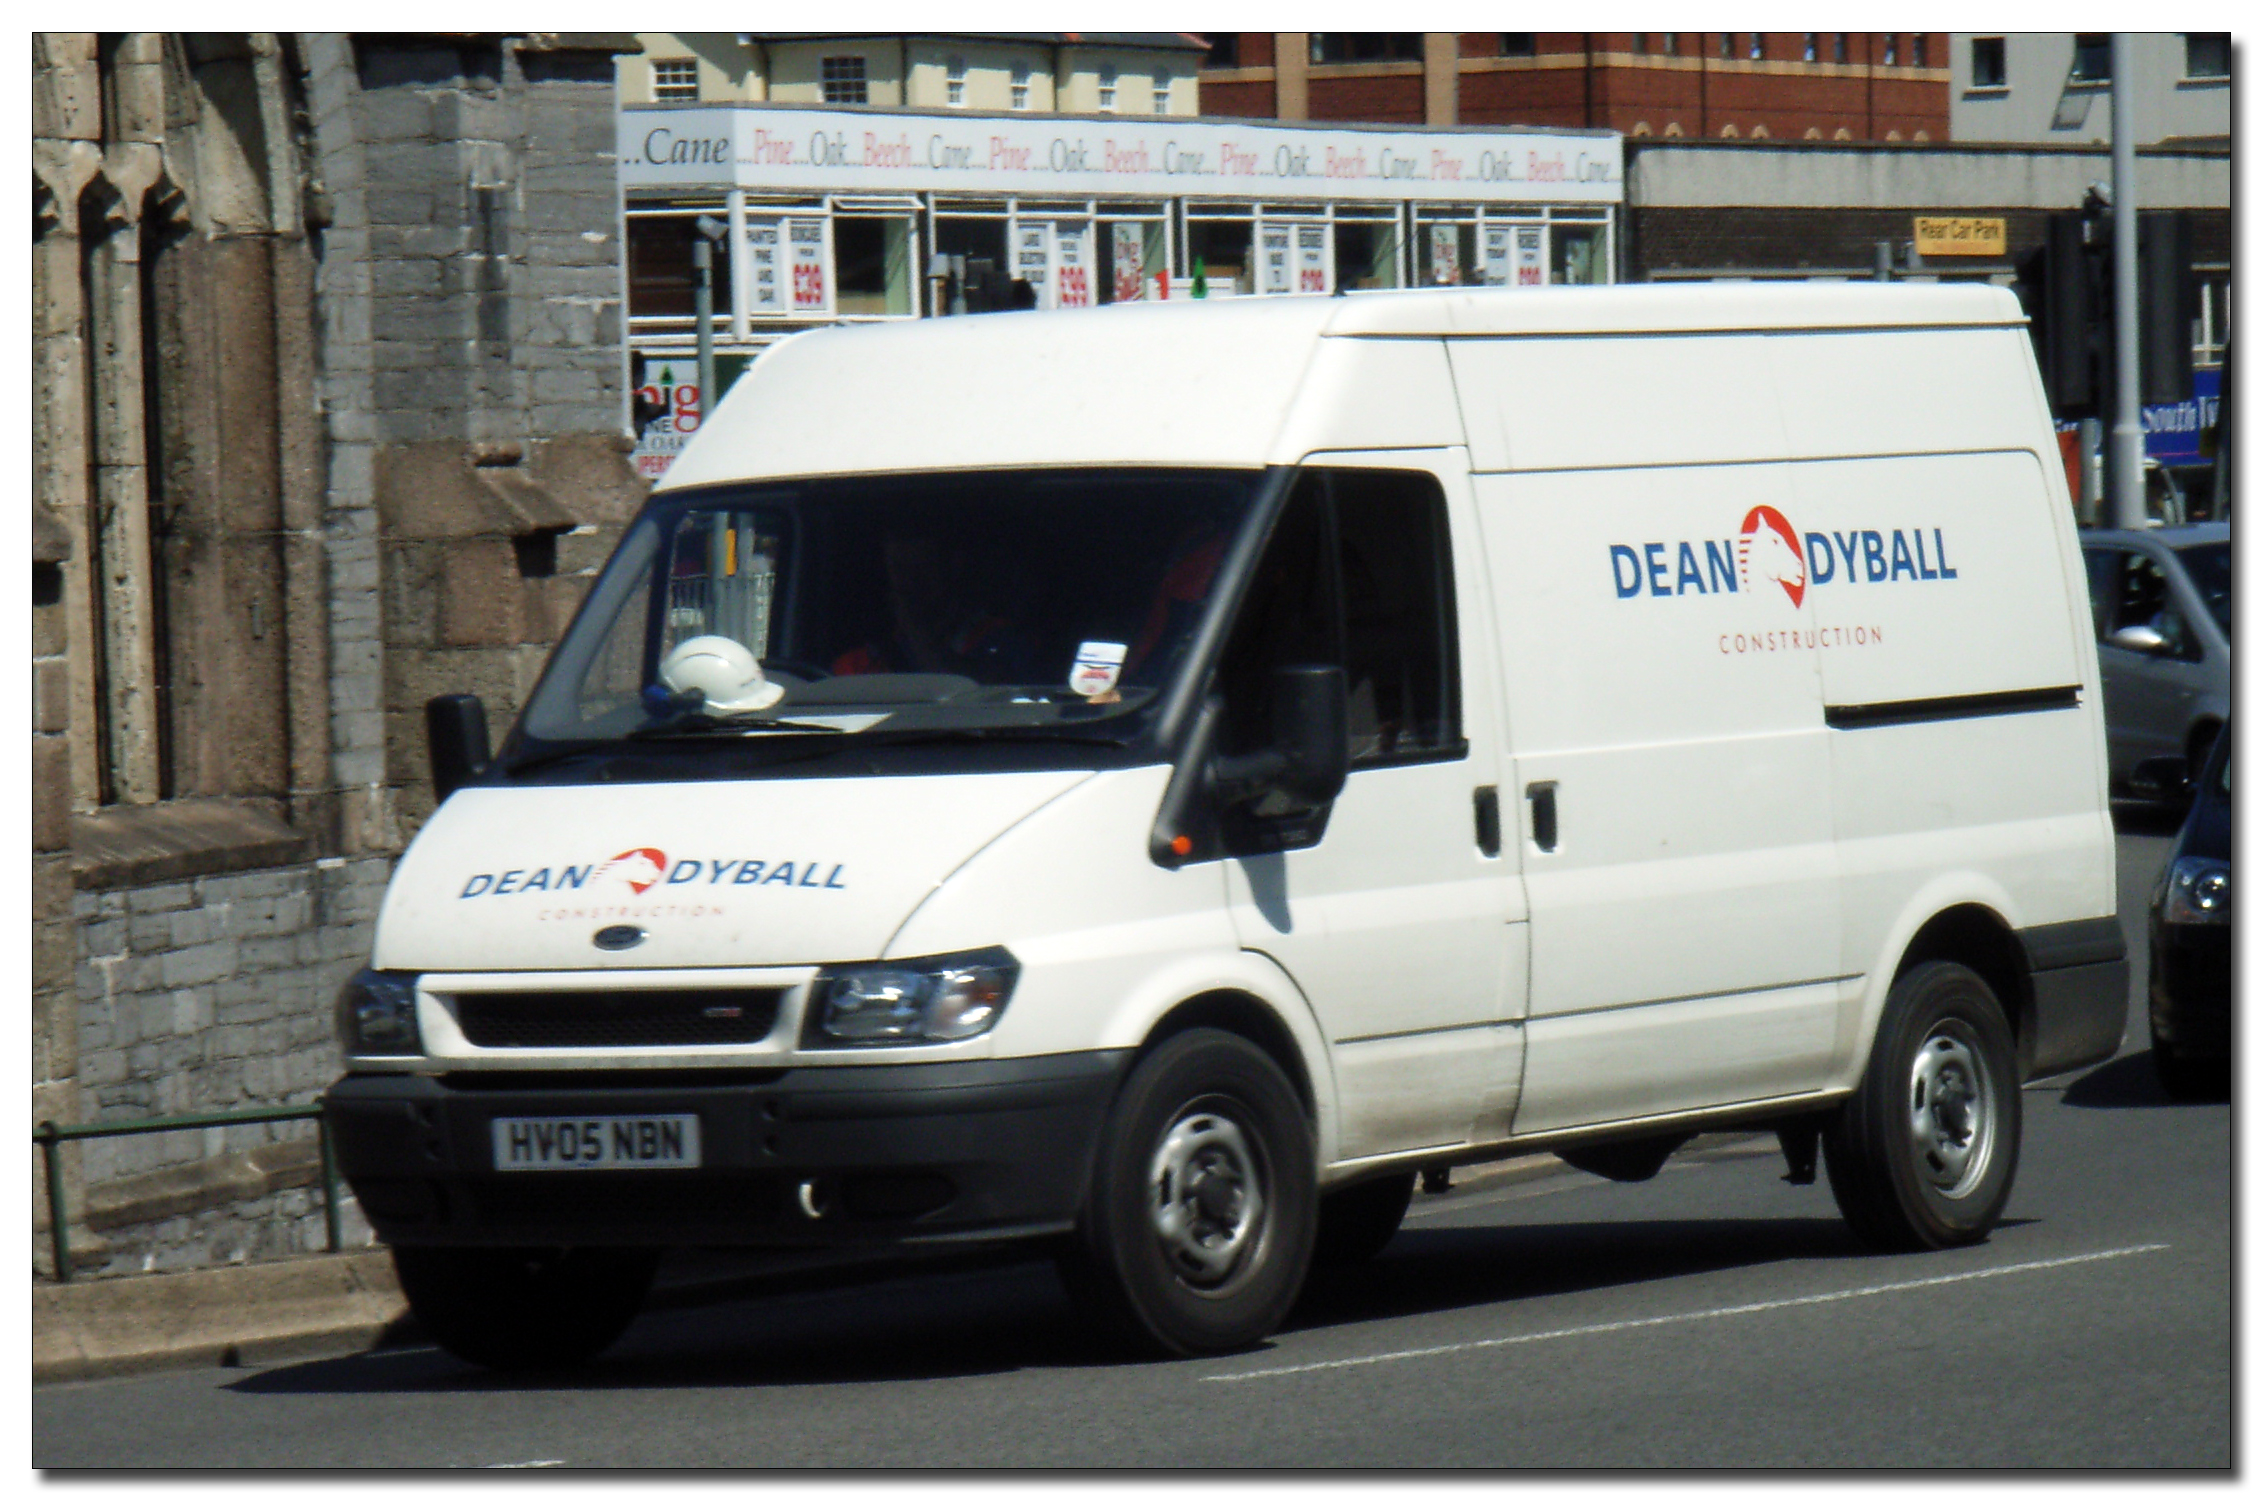 an delivery van on a street in front of brick building